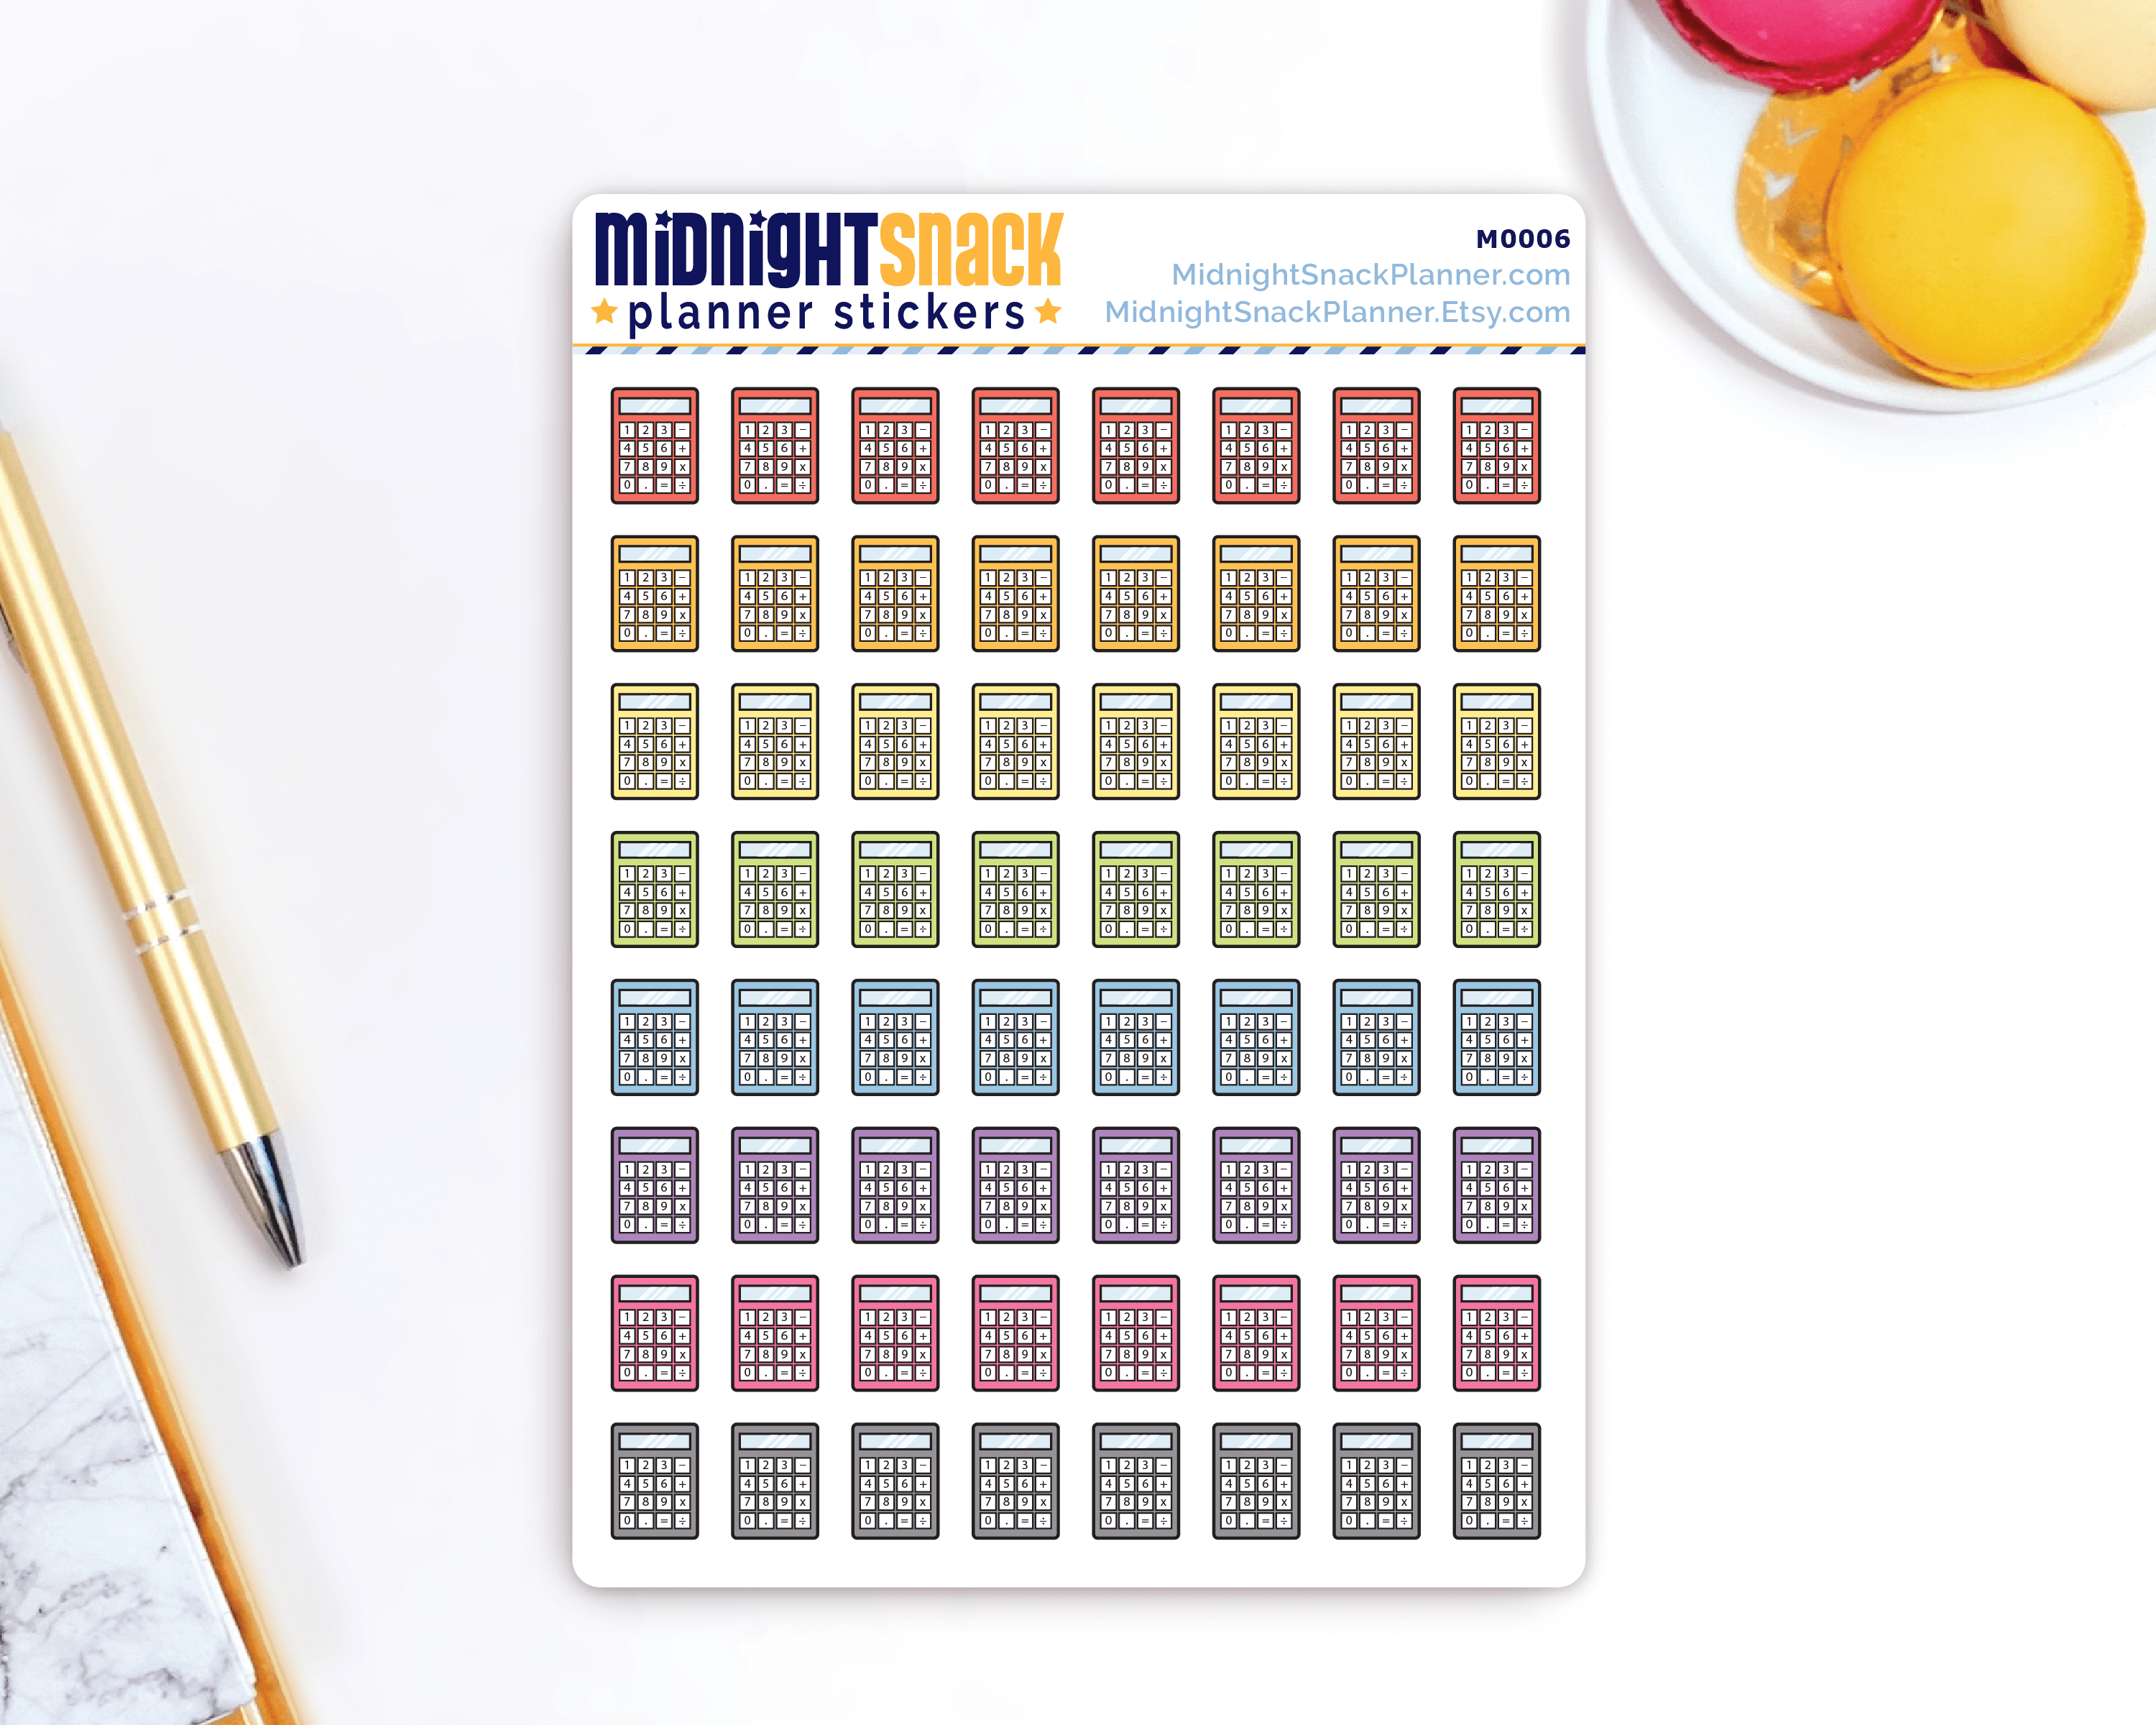 Calculator Icon: Bookkeeping or Math Planner Stickers: Midnight Snack Planner